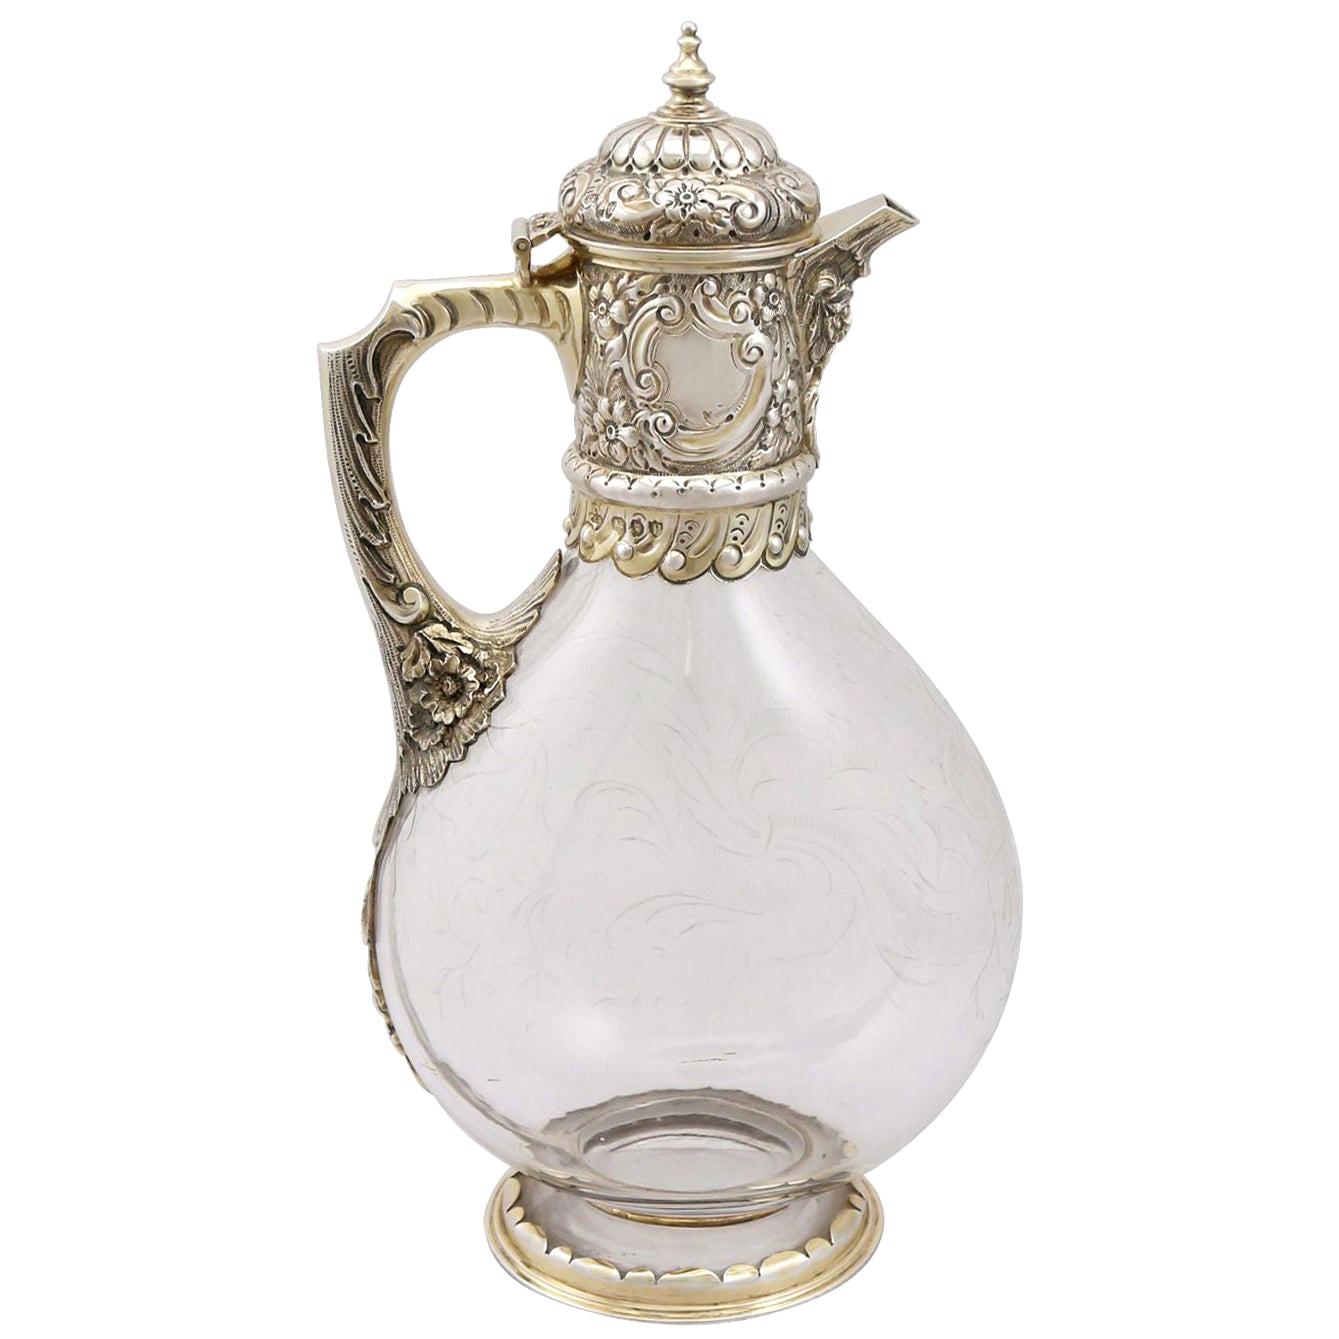 Glass and Sterling Silver Gilt Mounted Claret Jug, Antique Victorian, '1890'